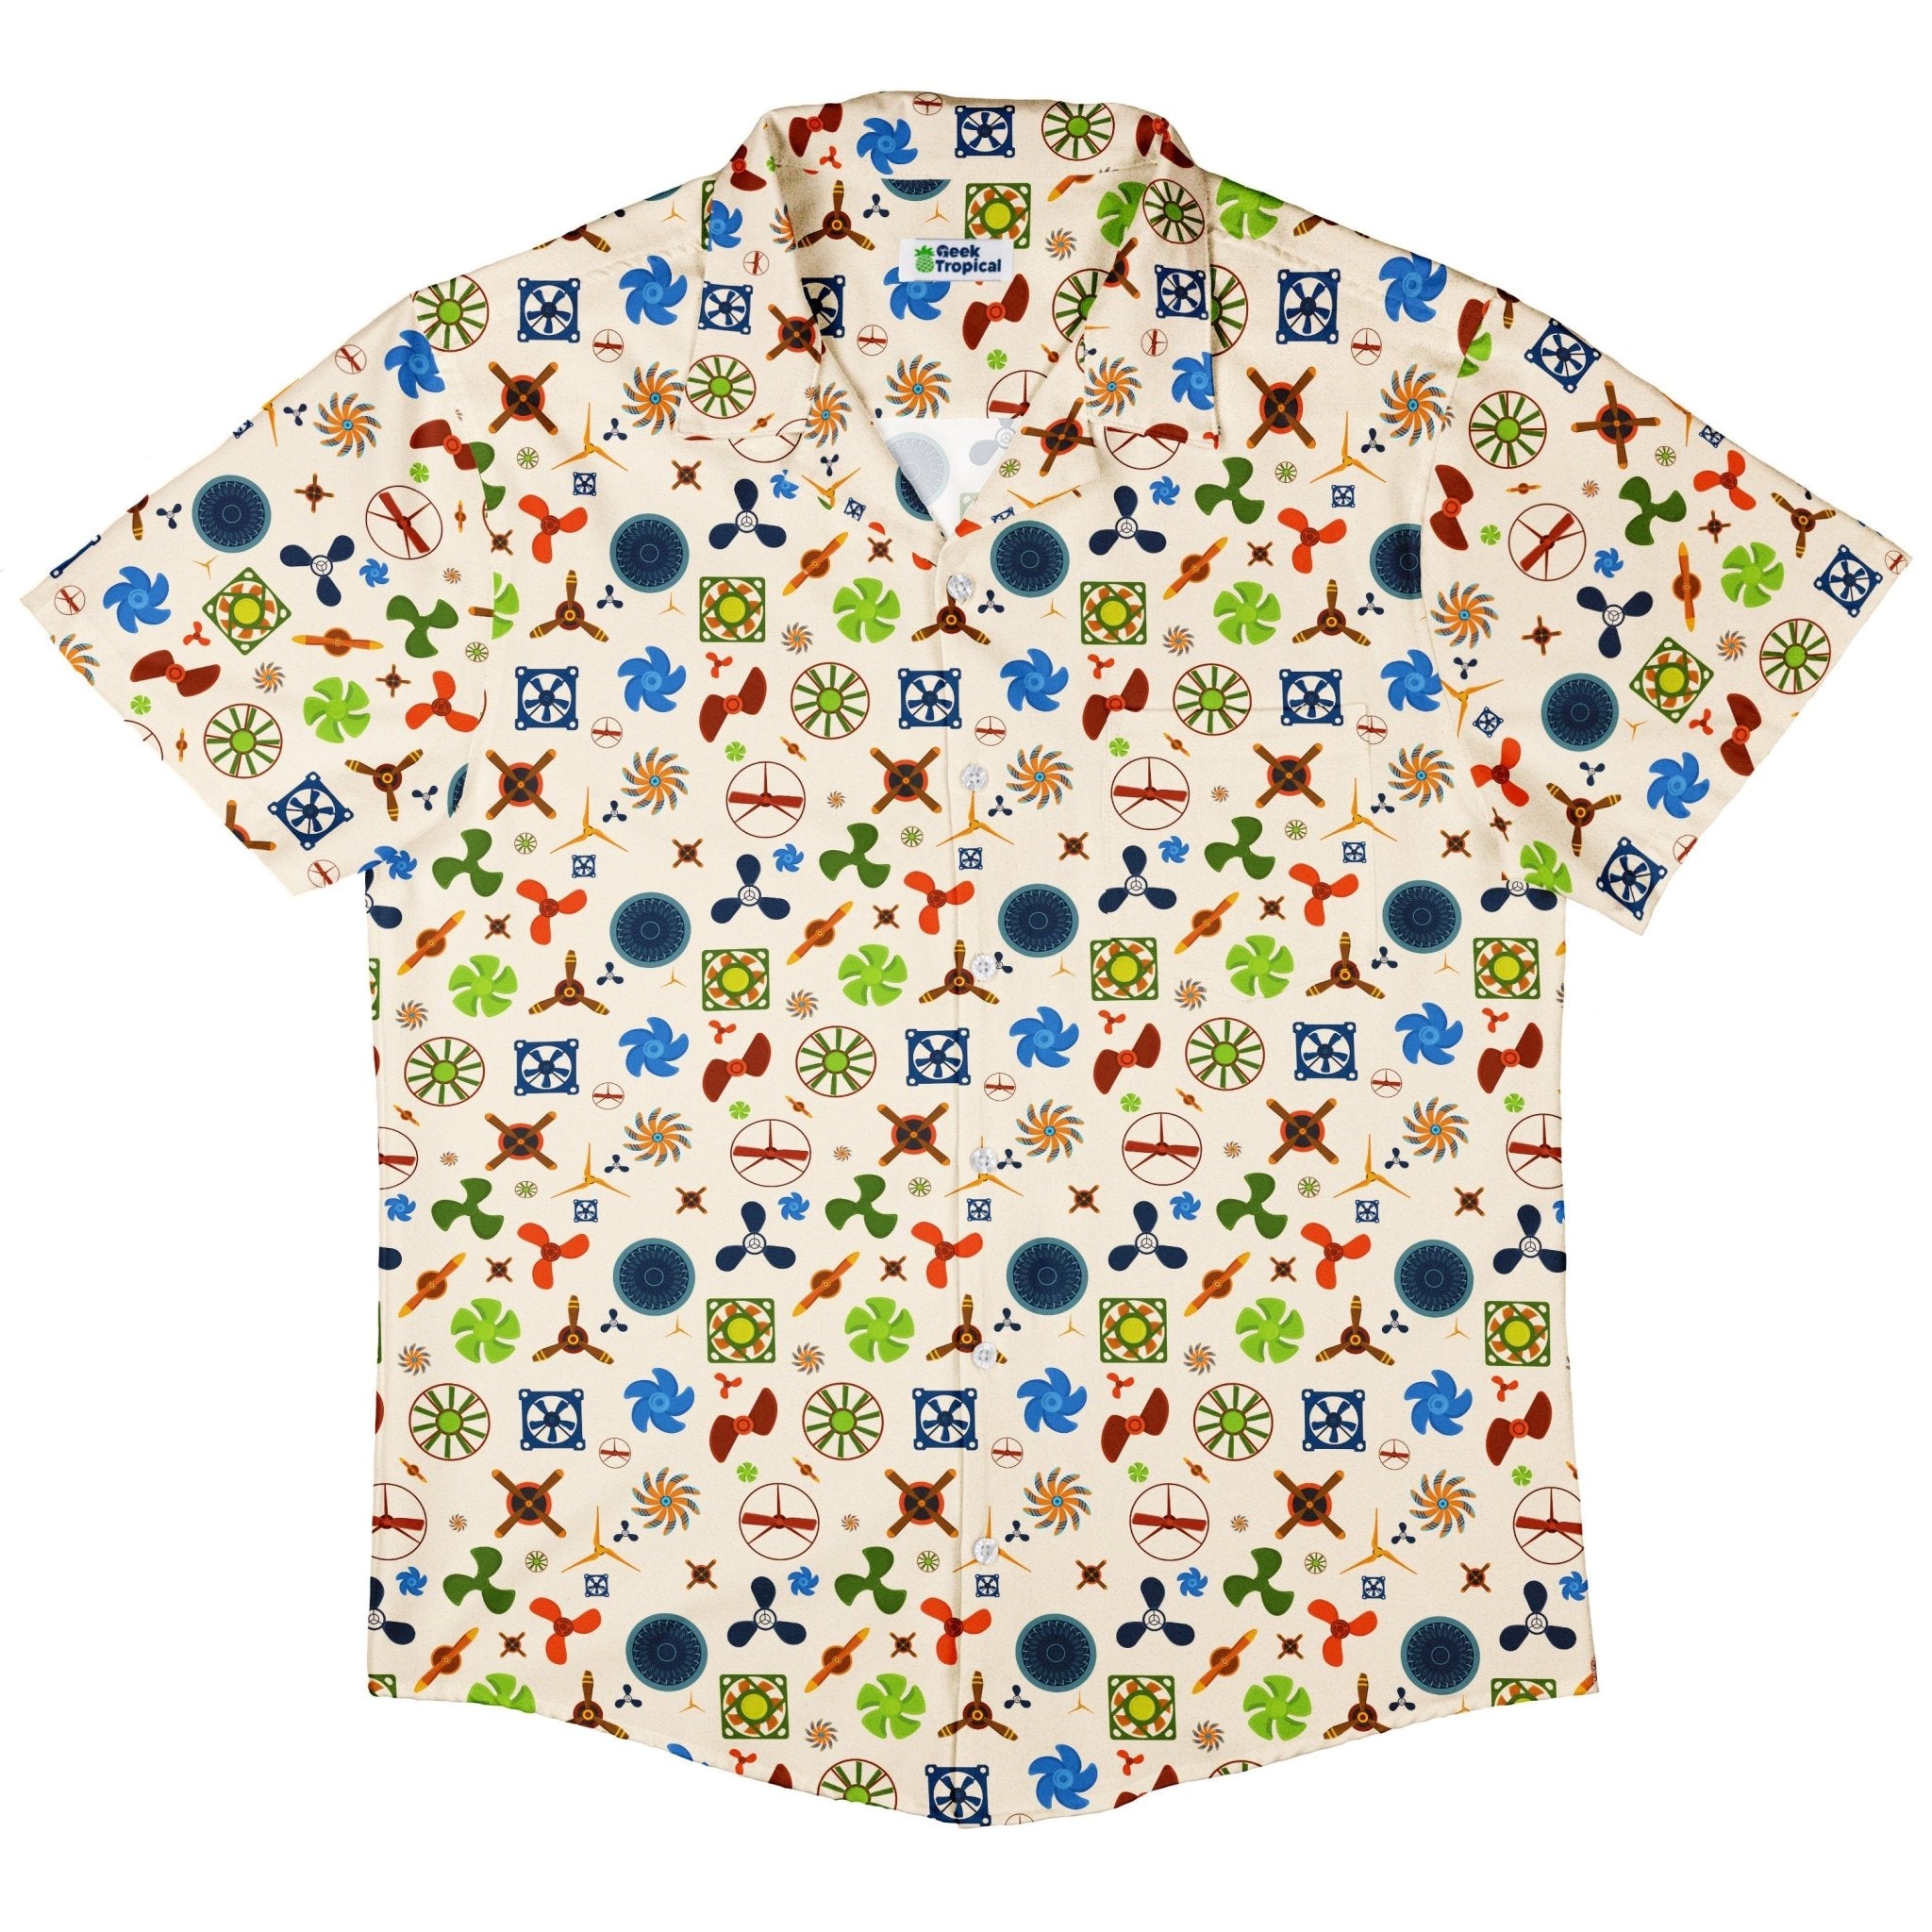 Propeller Party Tan Aviation Button Up Shirt - adult sizing - aviation print - Simple Patterns